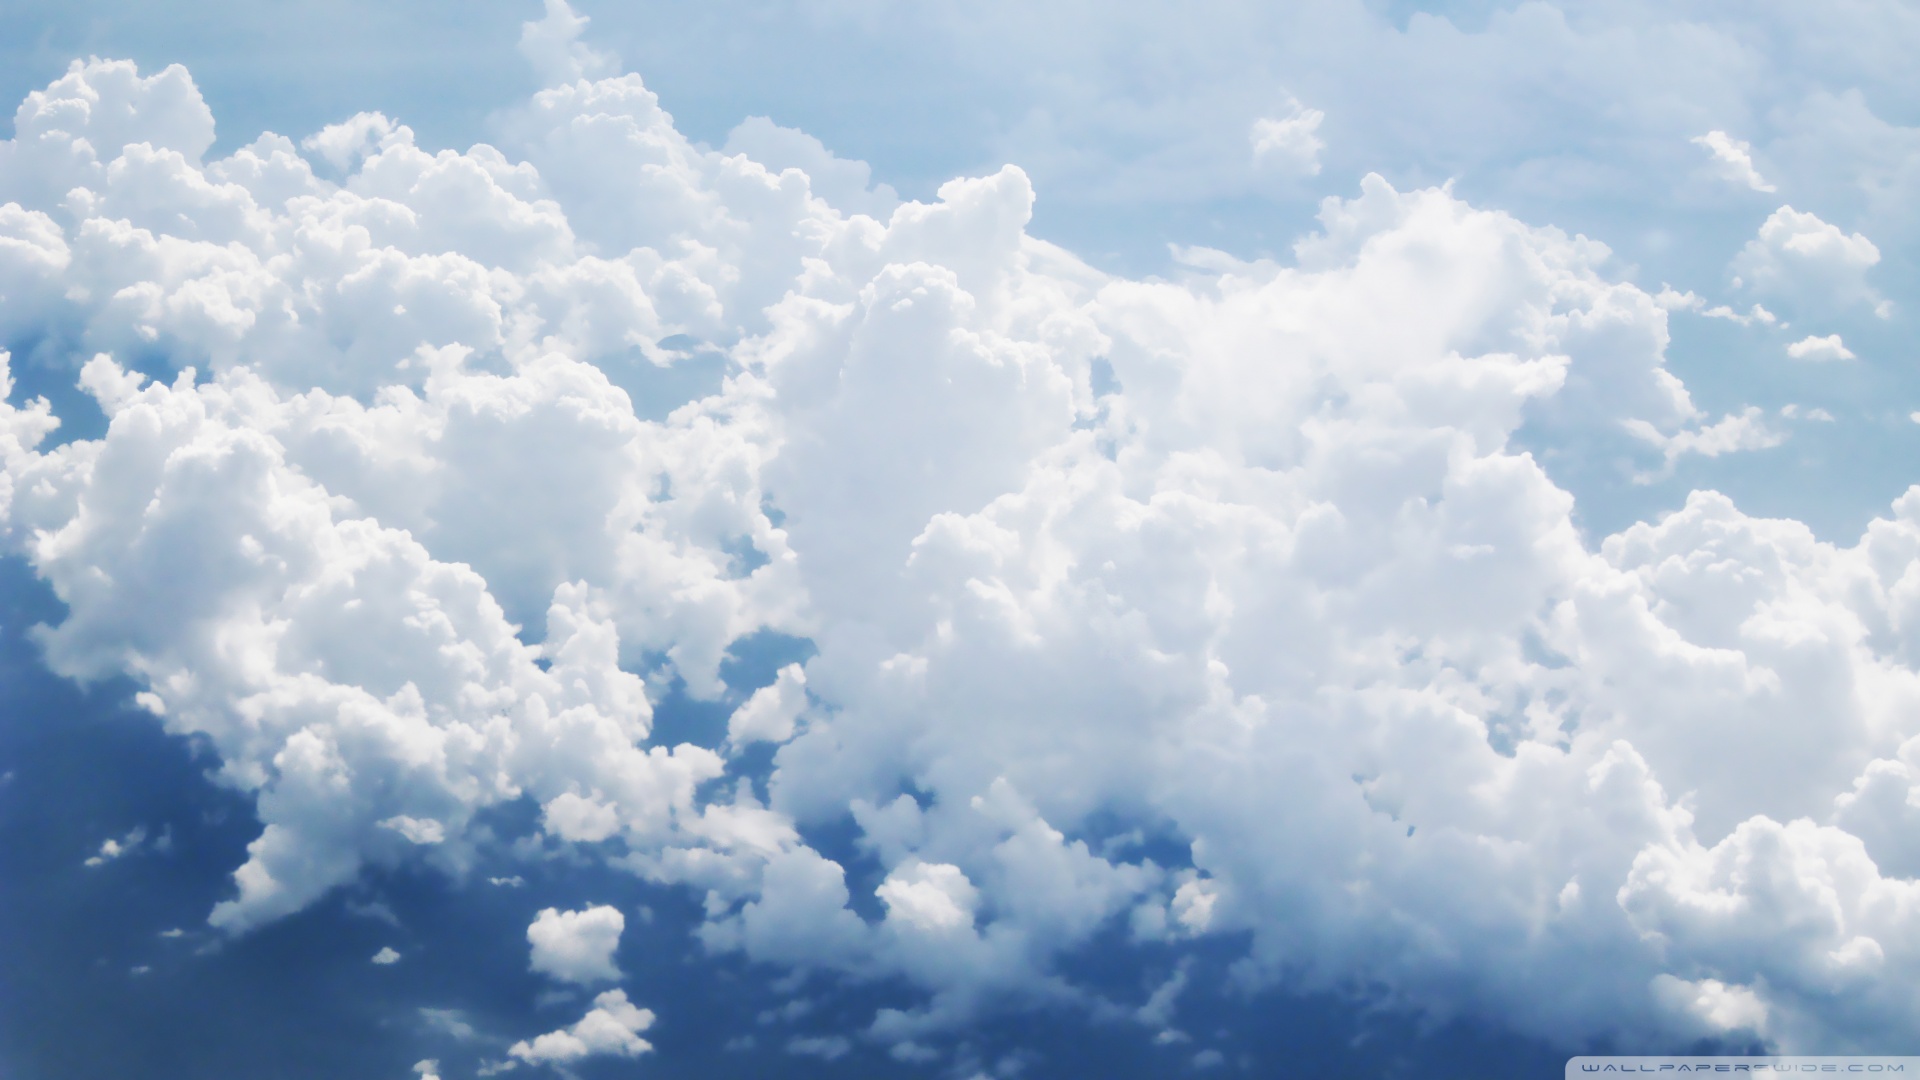 Clouds Aerial View Wallpaper 1920x1080 Clouds Aerial View